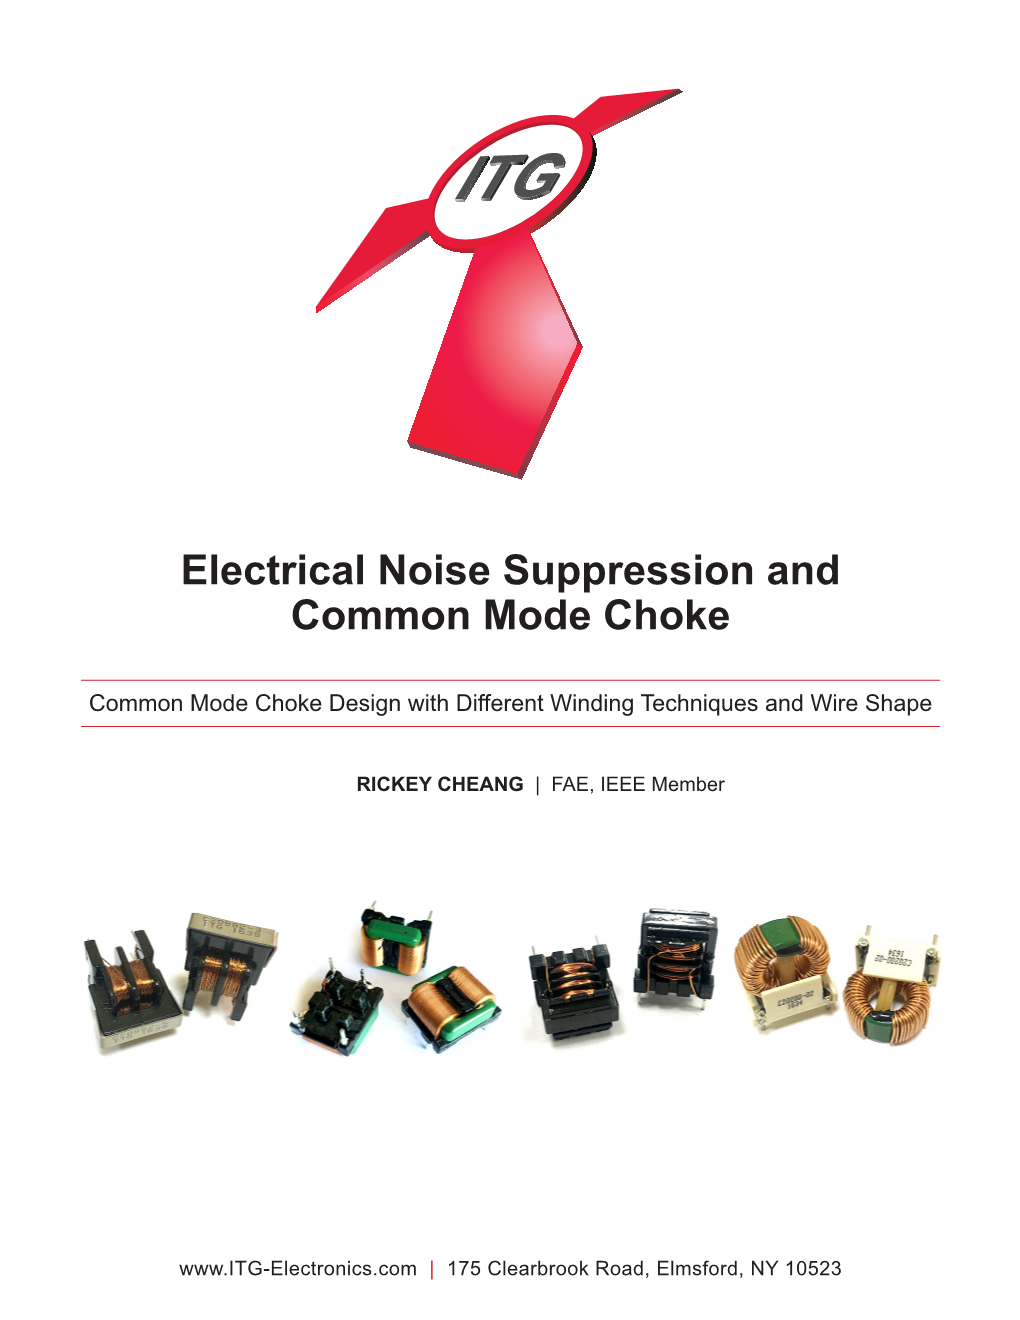 Electrical Noise Suppression and Common Mode Choke